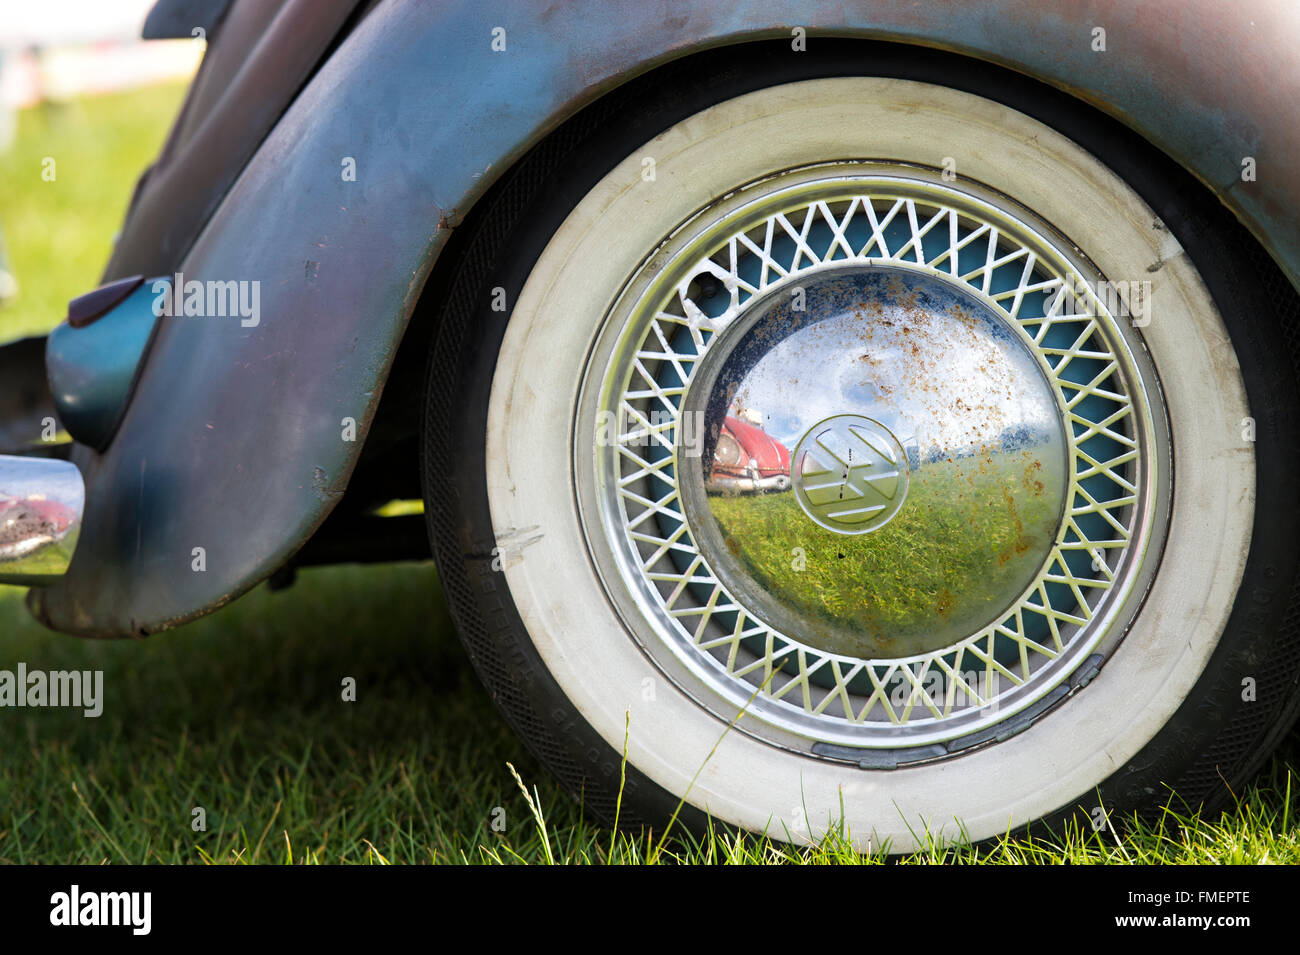 VW Beetle car wheel with a white wall tyre Stock Photo